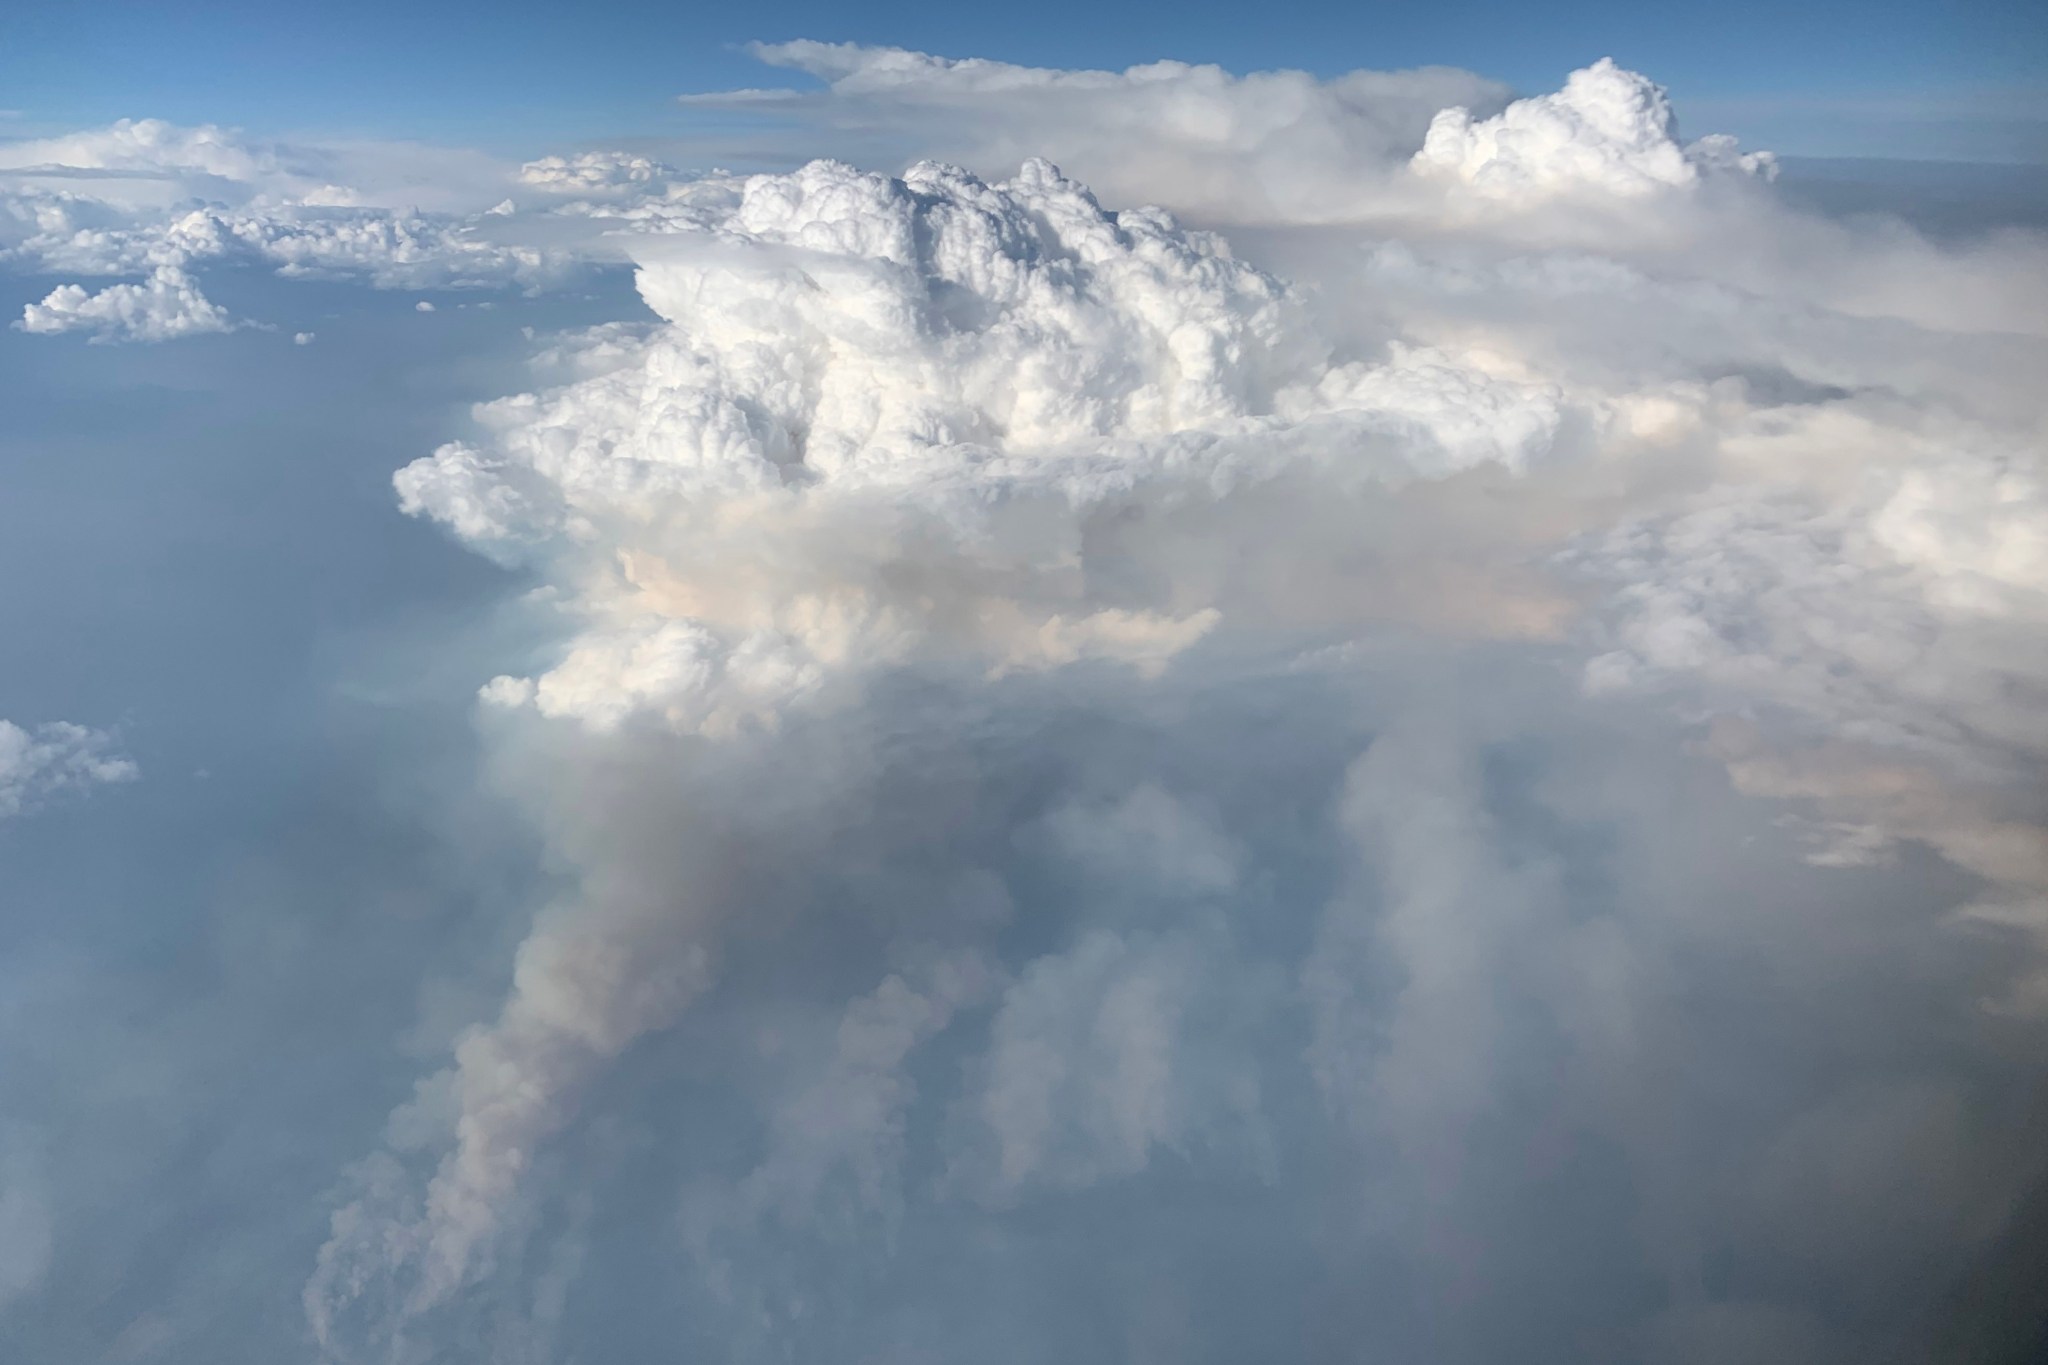 Image of a large white cumulus cloud rising above the average atmospheric clouds surrounding. The cloud has apparent columns attaching it to the ground below.